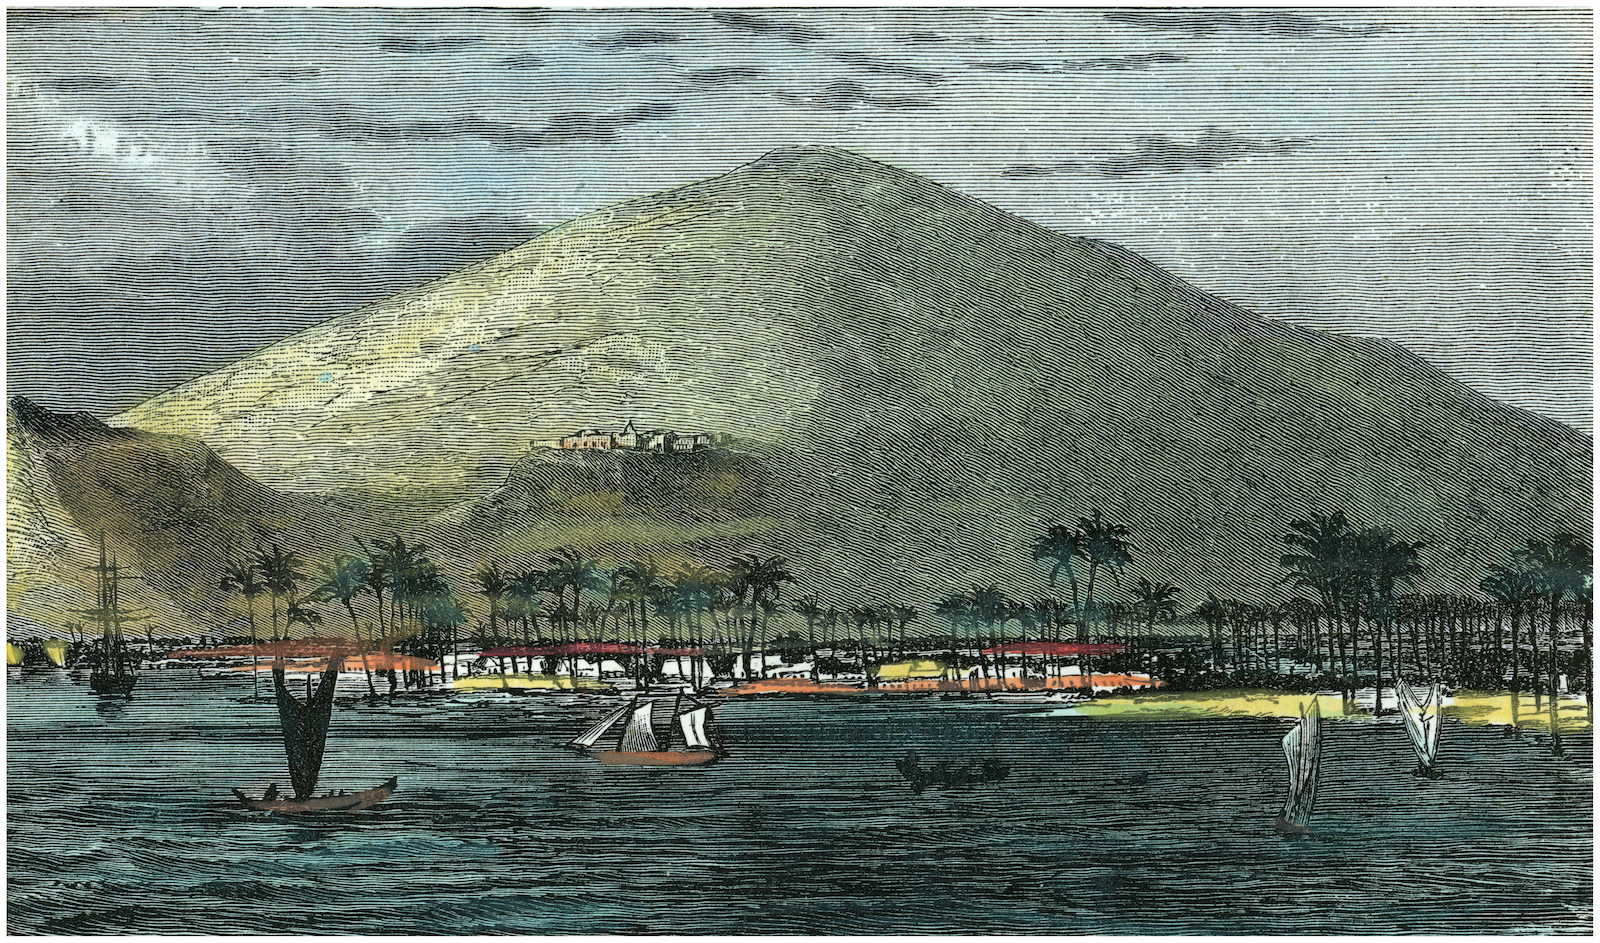 an engraving of an island with small town and palm trees